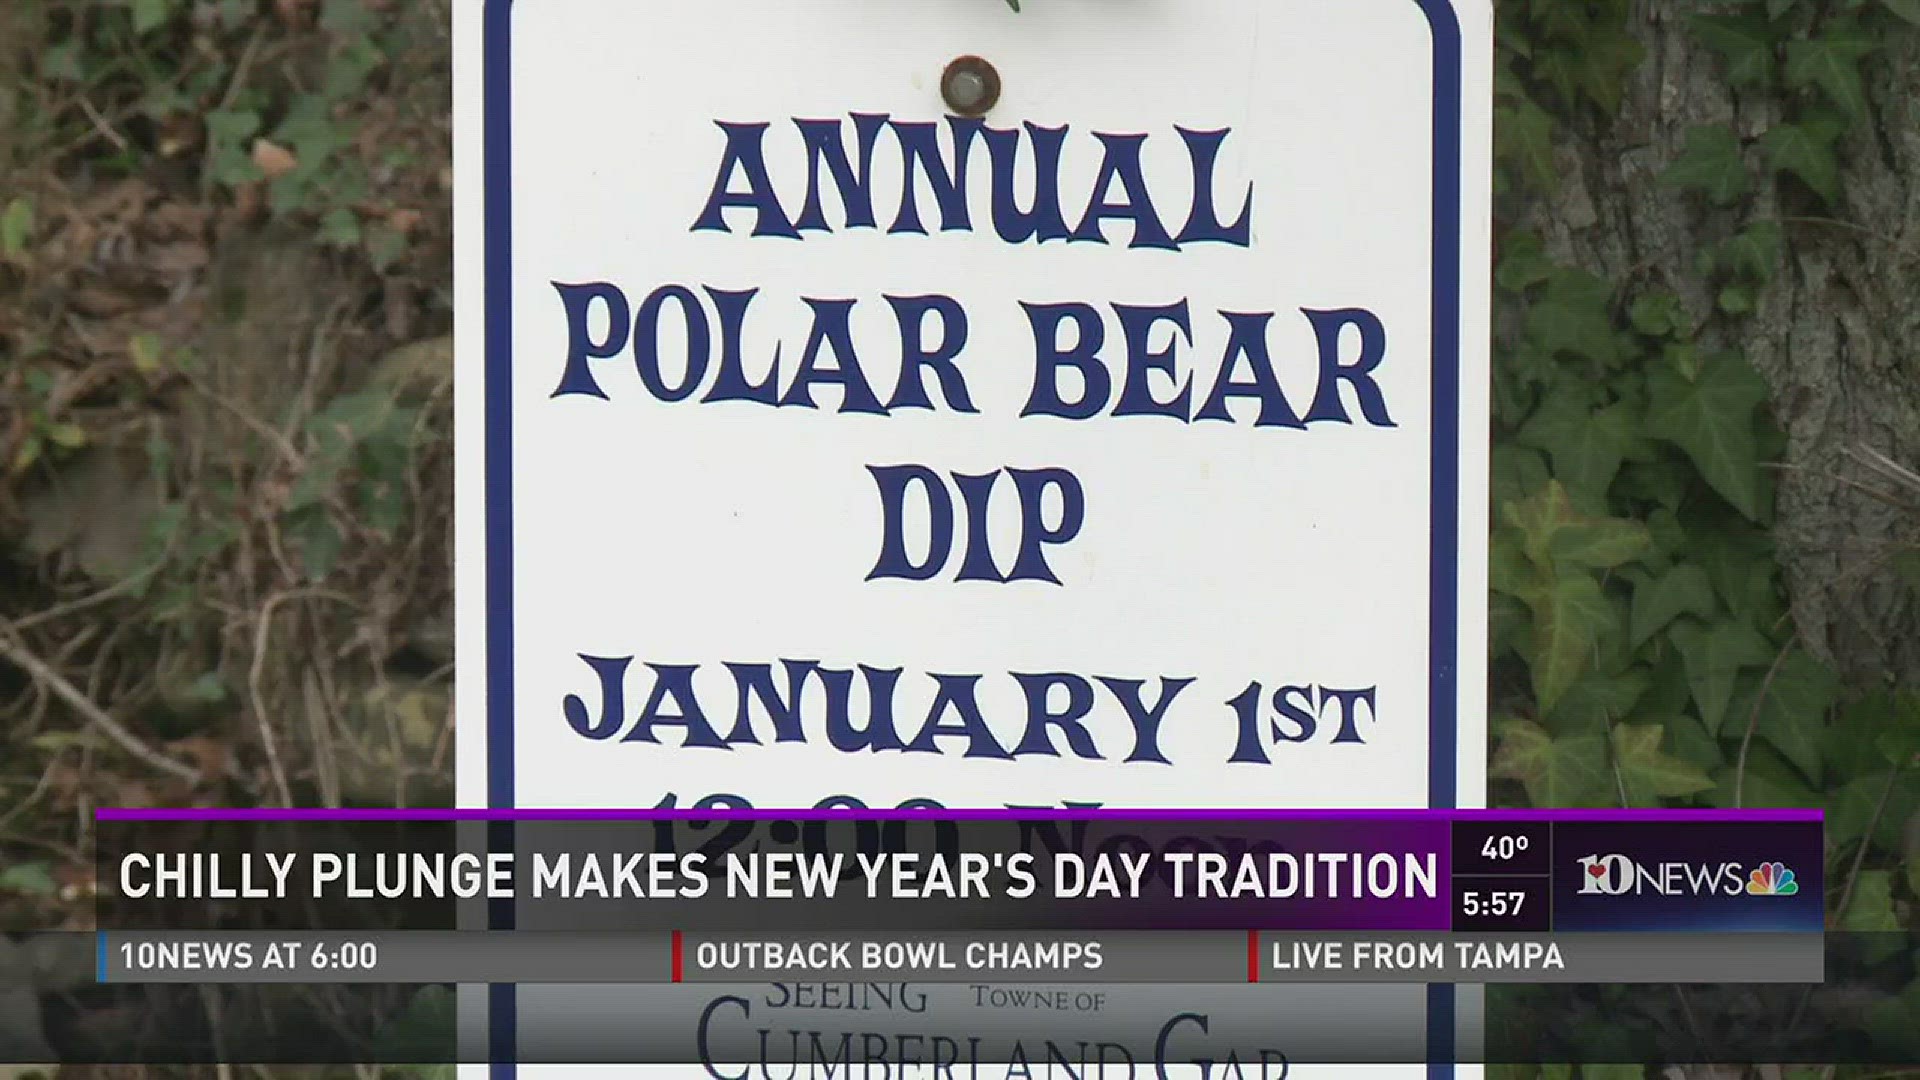 Some brave folks up in Cumberland Gap took the chilly plunge with the Polar Bear Dip. Jan. 1, 2016